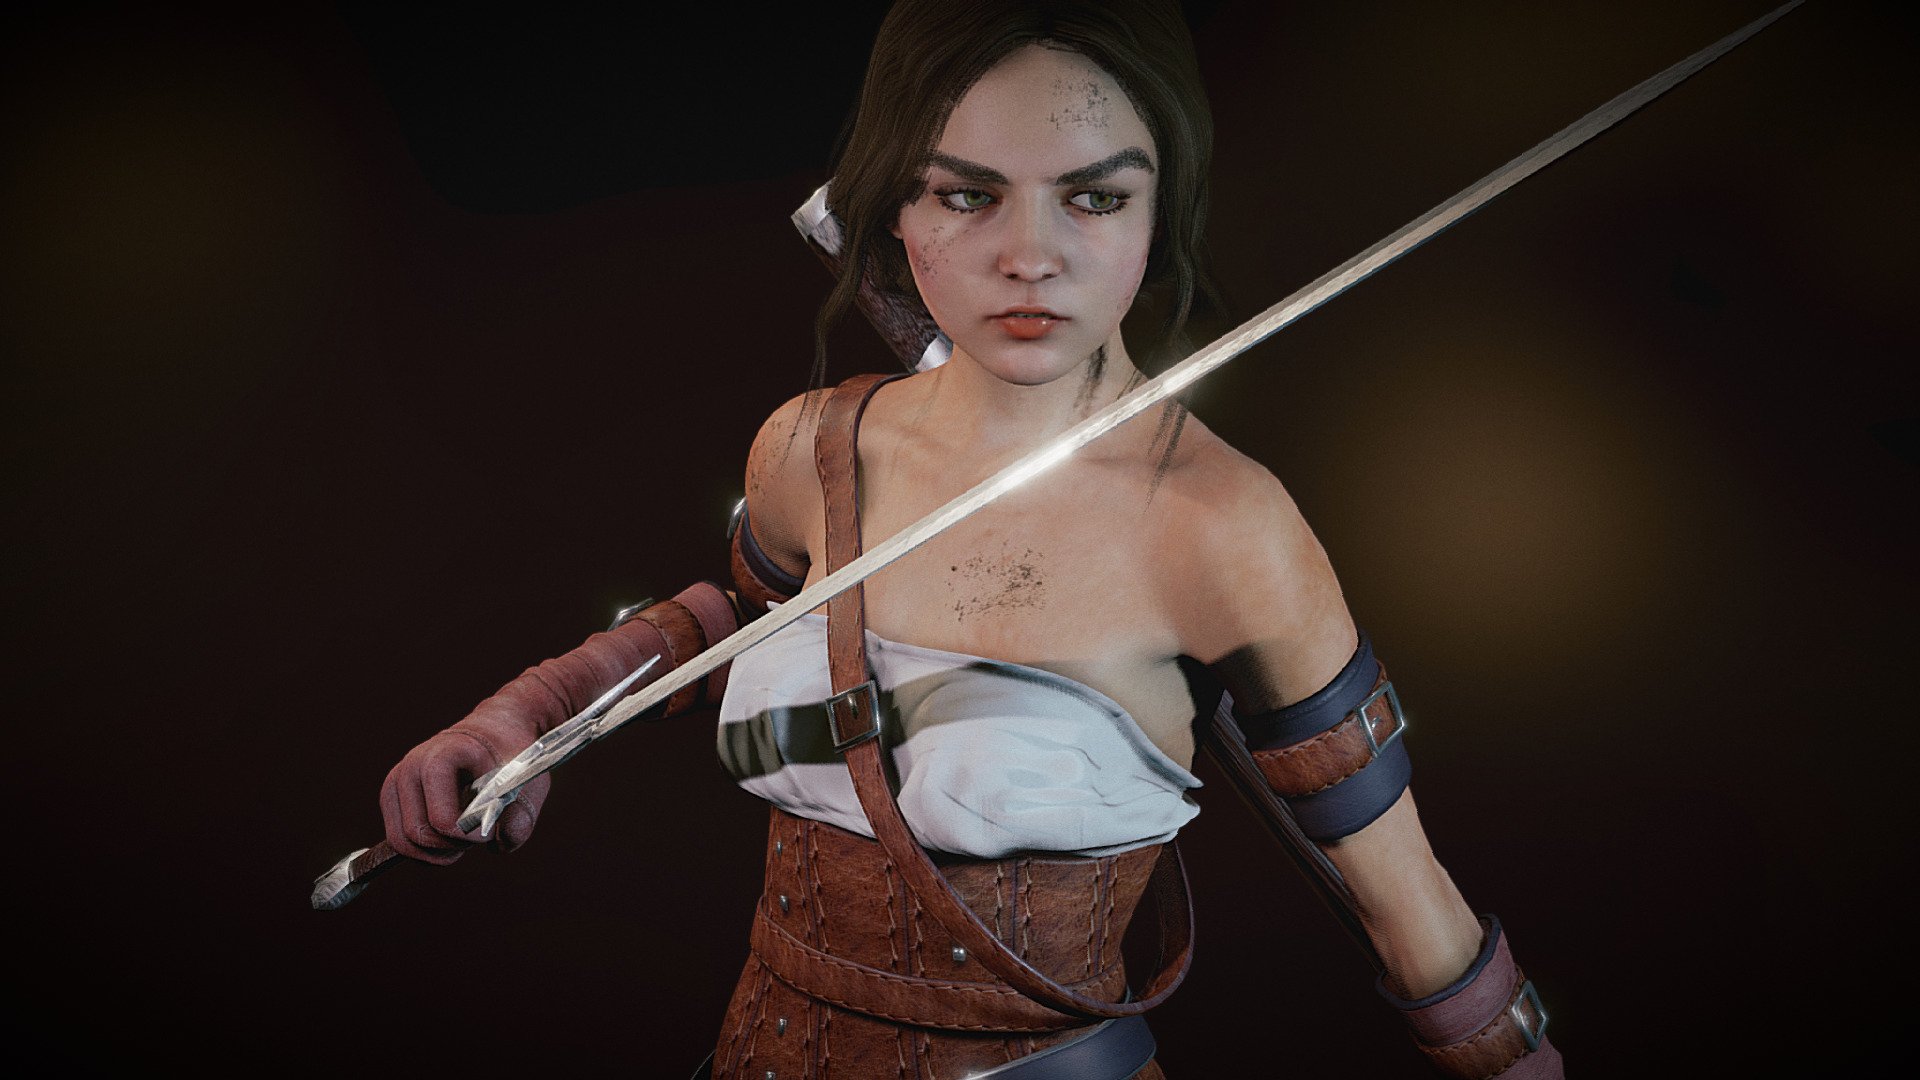 Medieval Warrior Girl with Sword model in Blender. body rigged and basic face rig. Mixamo bone names for animation. sss. eevee and cycles ready. includes shapekeys for different looks 3d model